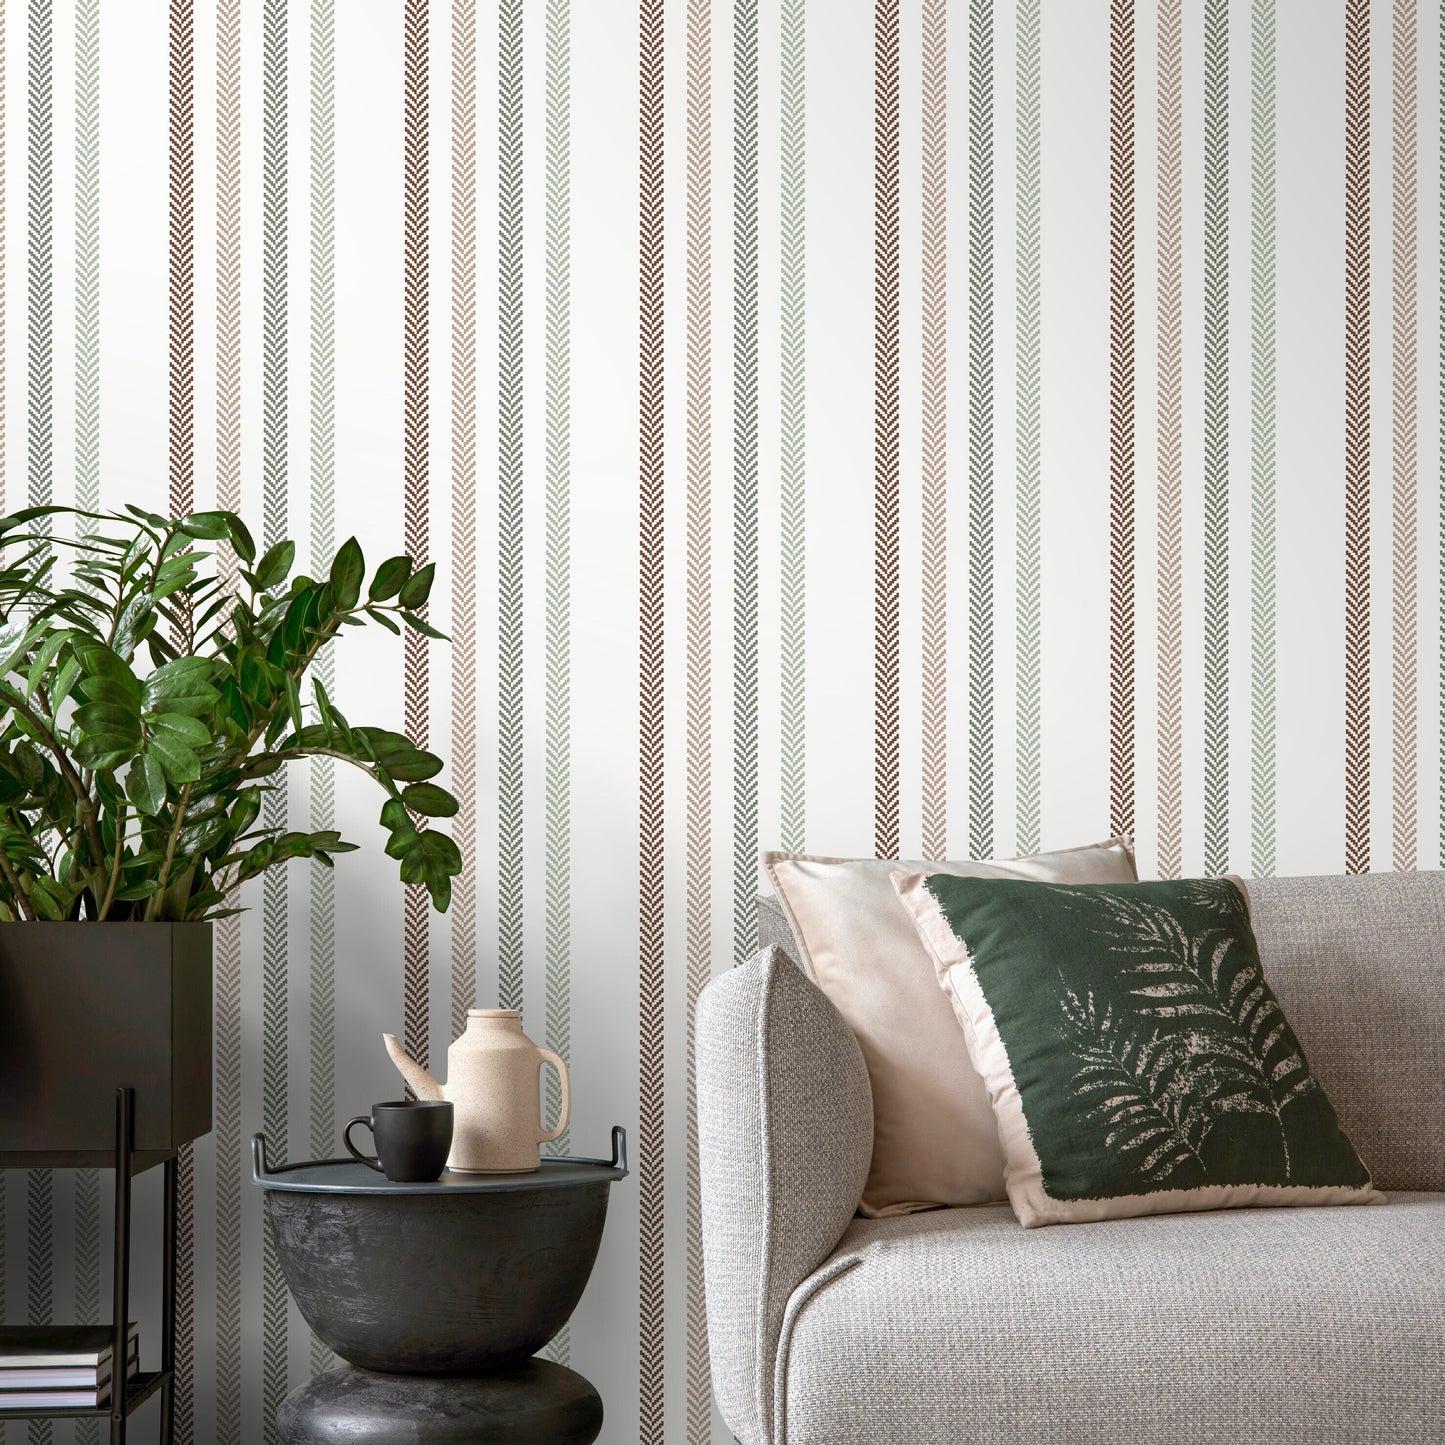 Boho Striped Wallpaper Farmhouse Wallpaper Peel and Stick and Traditional Wallpaper - D779